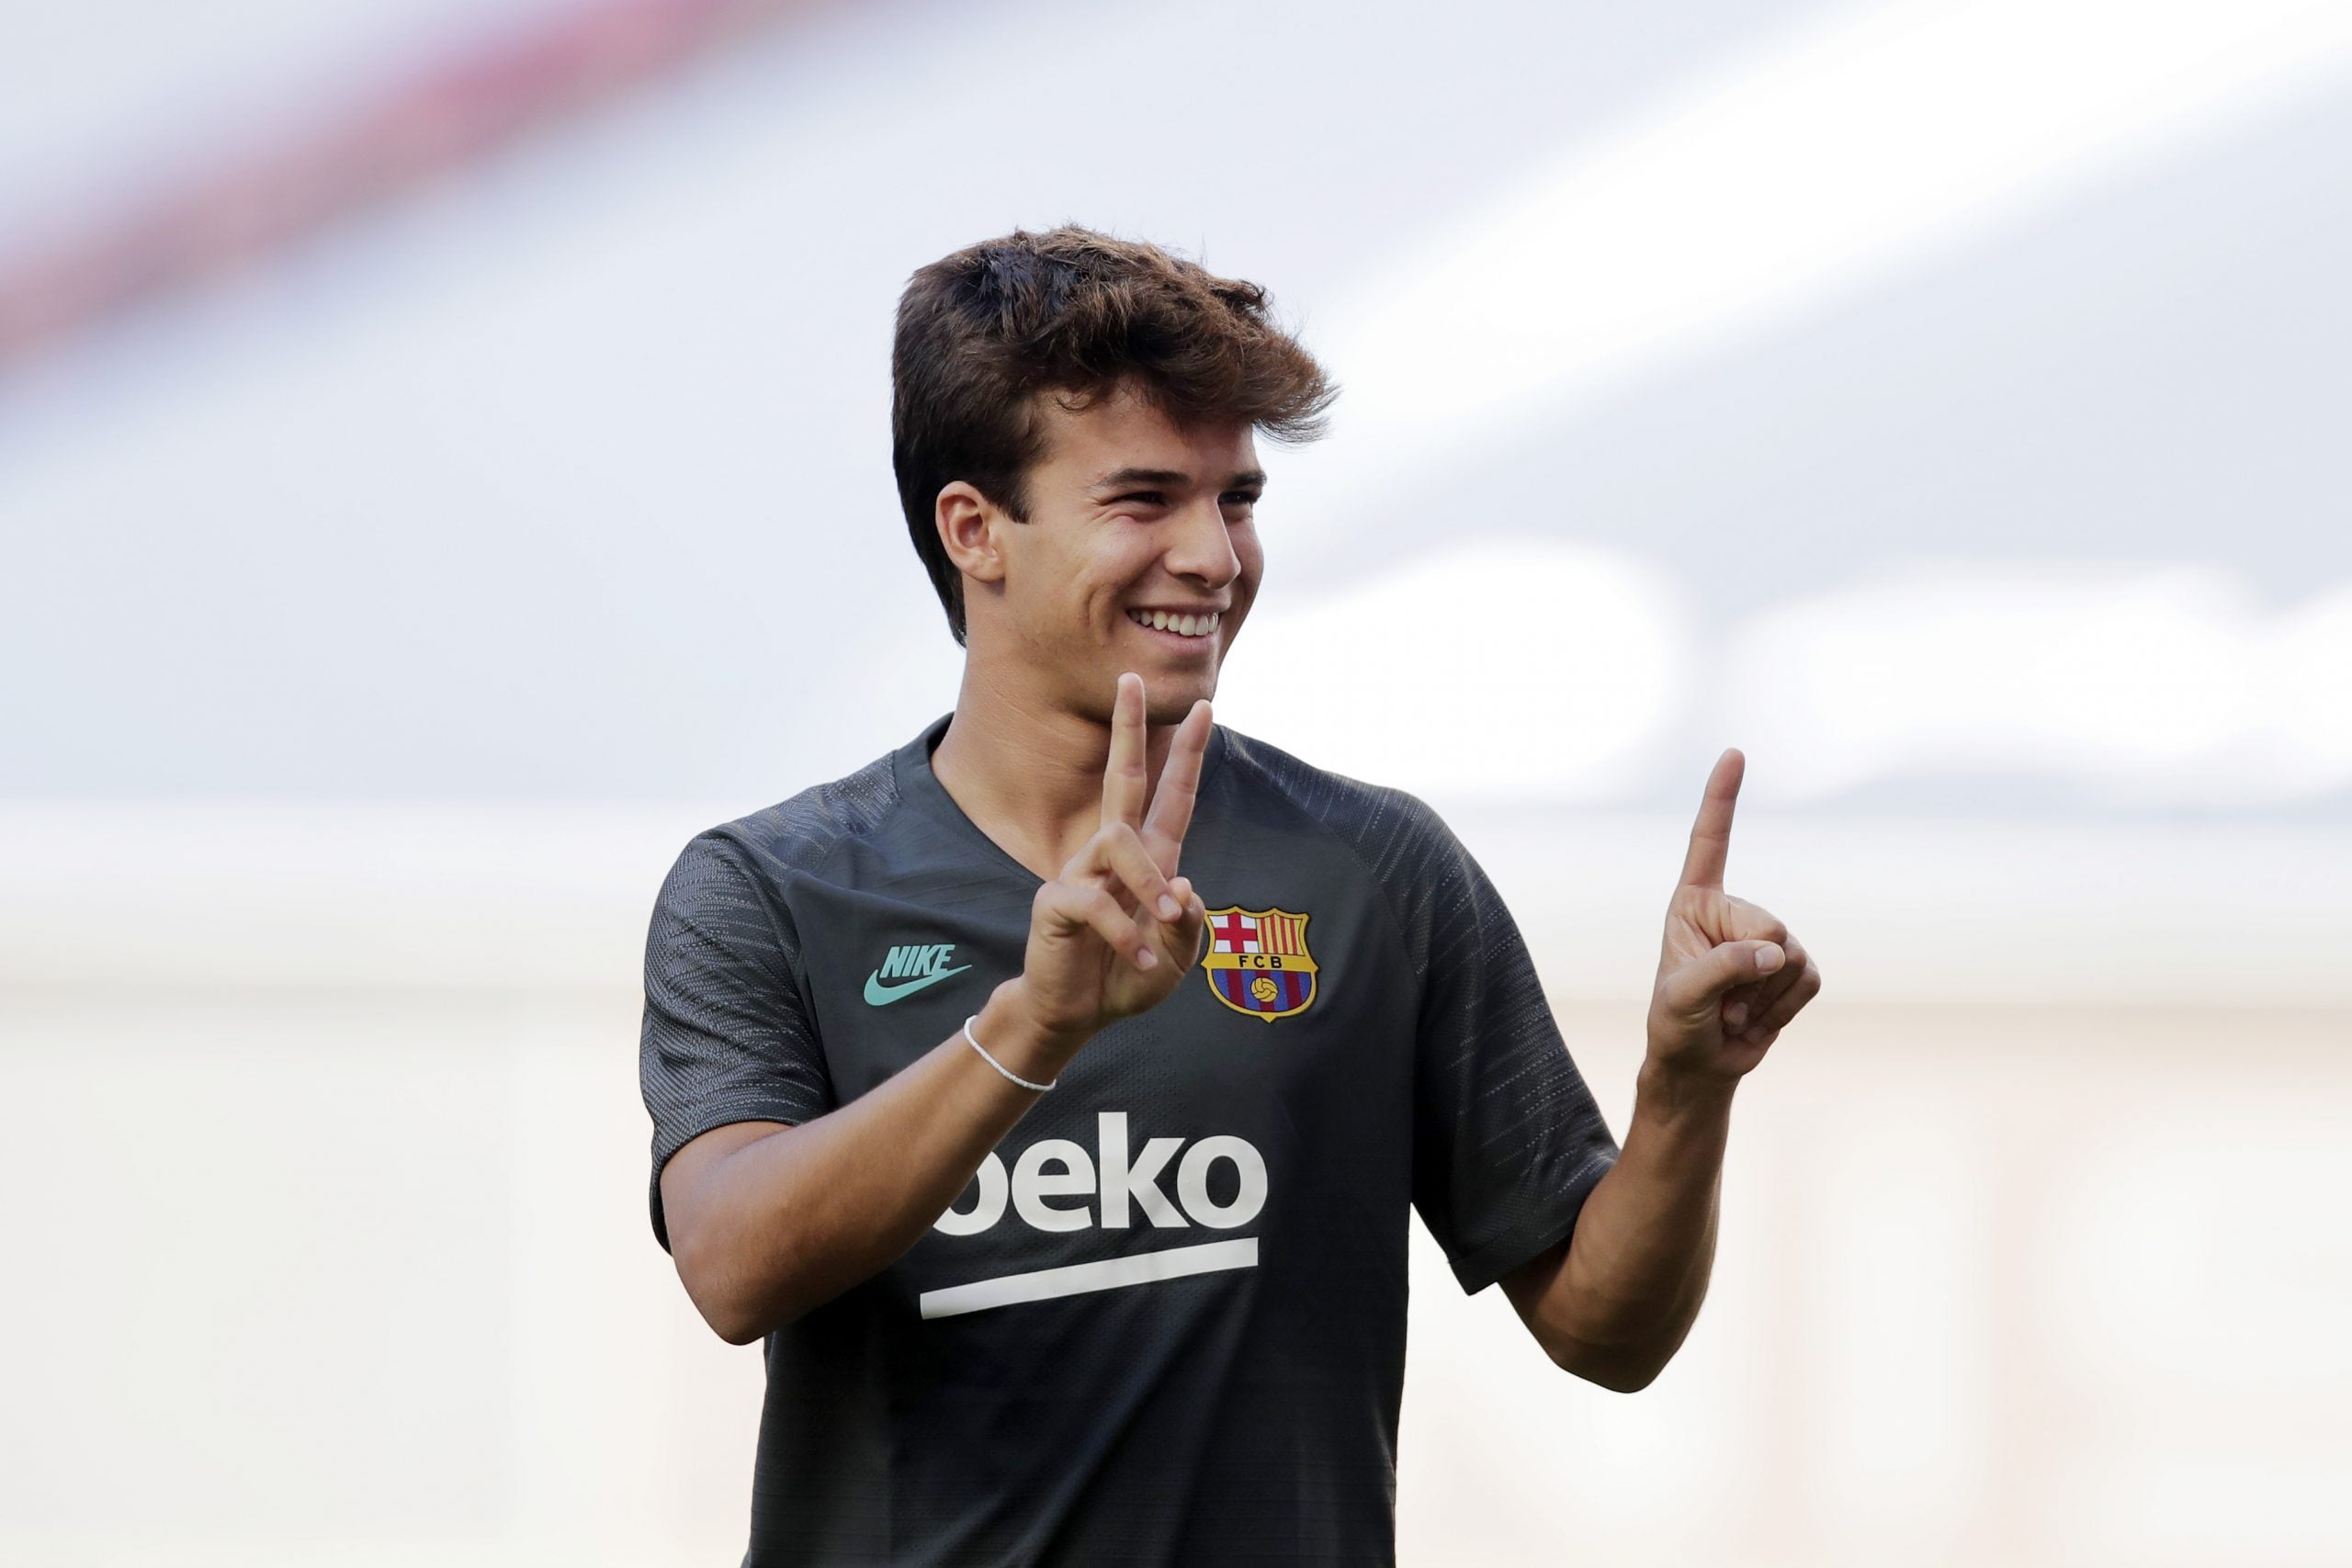 Barcelona prepared to extend Riqui Puig's contract (Puig is seen in the photo)